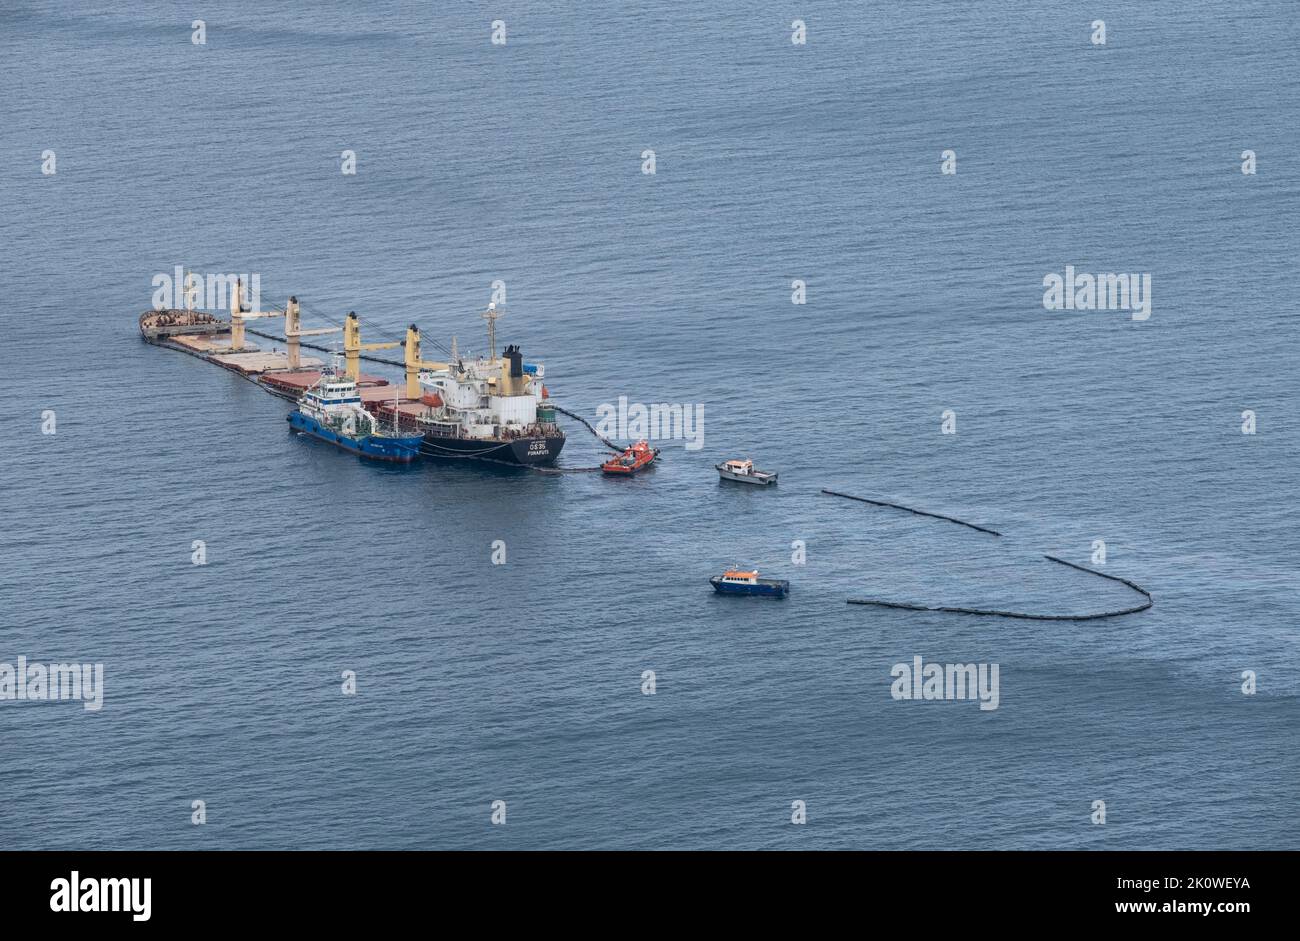 The OS 35 bulk carrier which collided with the Adam LNG tanker off Gibraltar, lies beached as crews clean up and prevent the spread of oil. Stock Photo